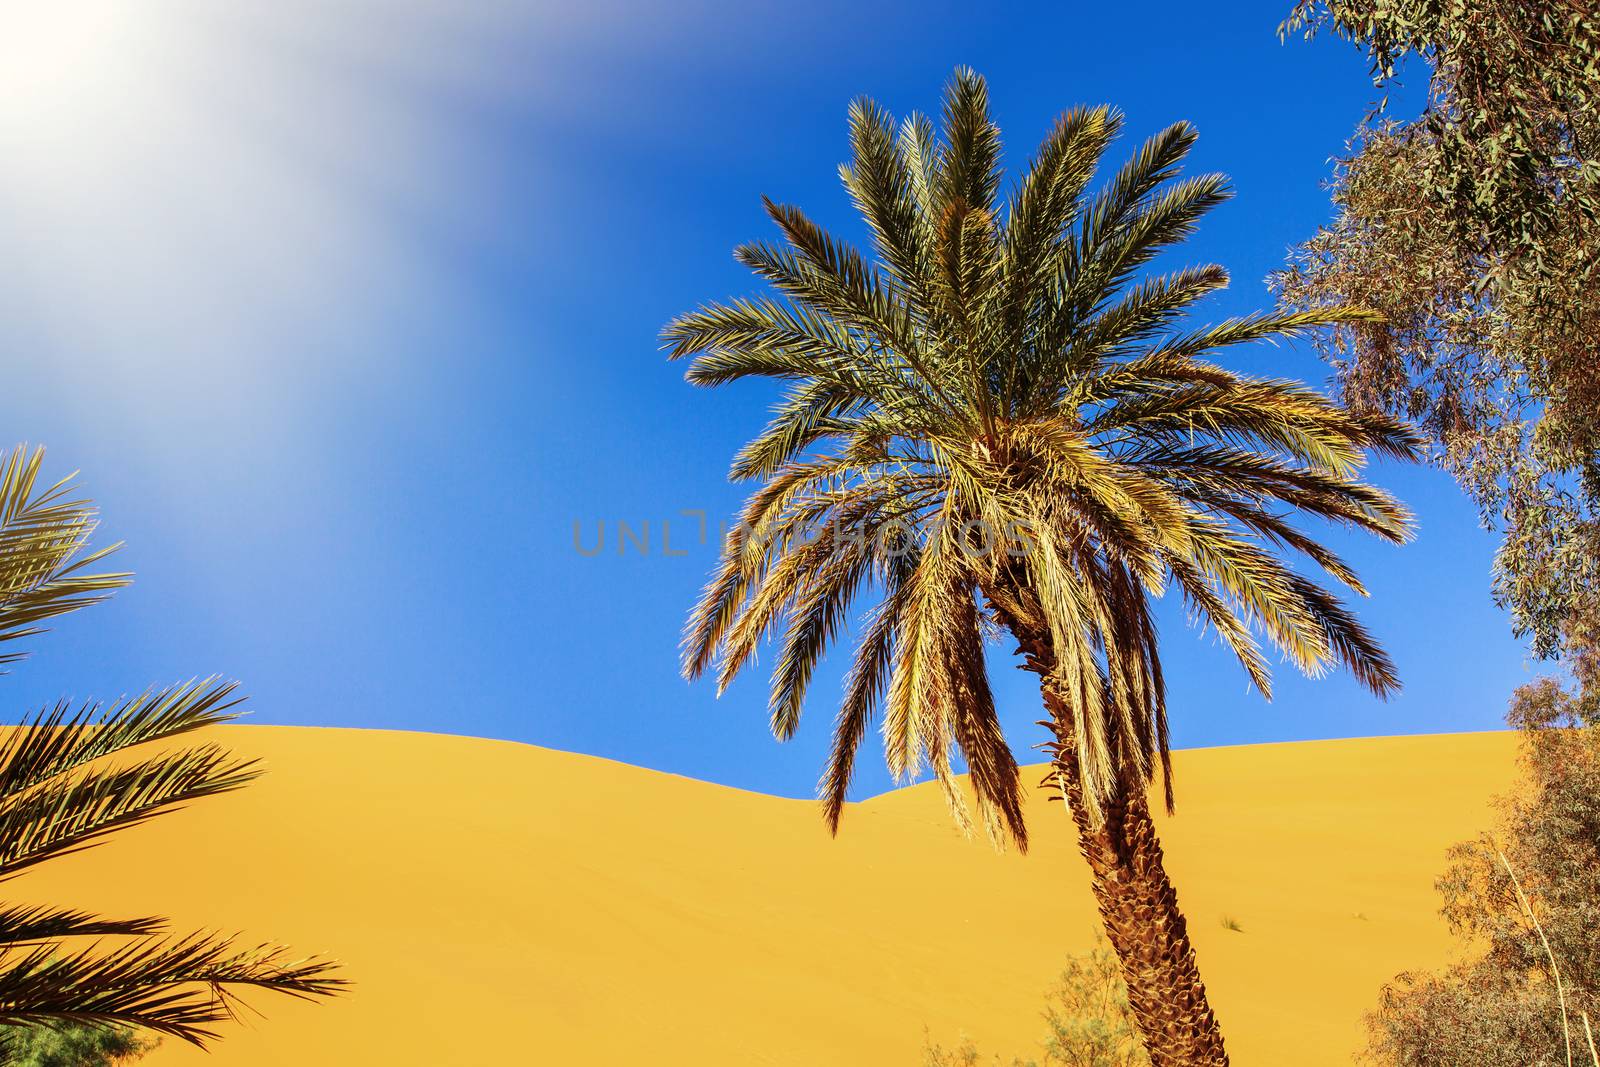 Beautiful Moroccan Mountain landscape in desert with oasis